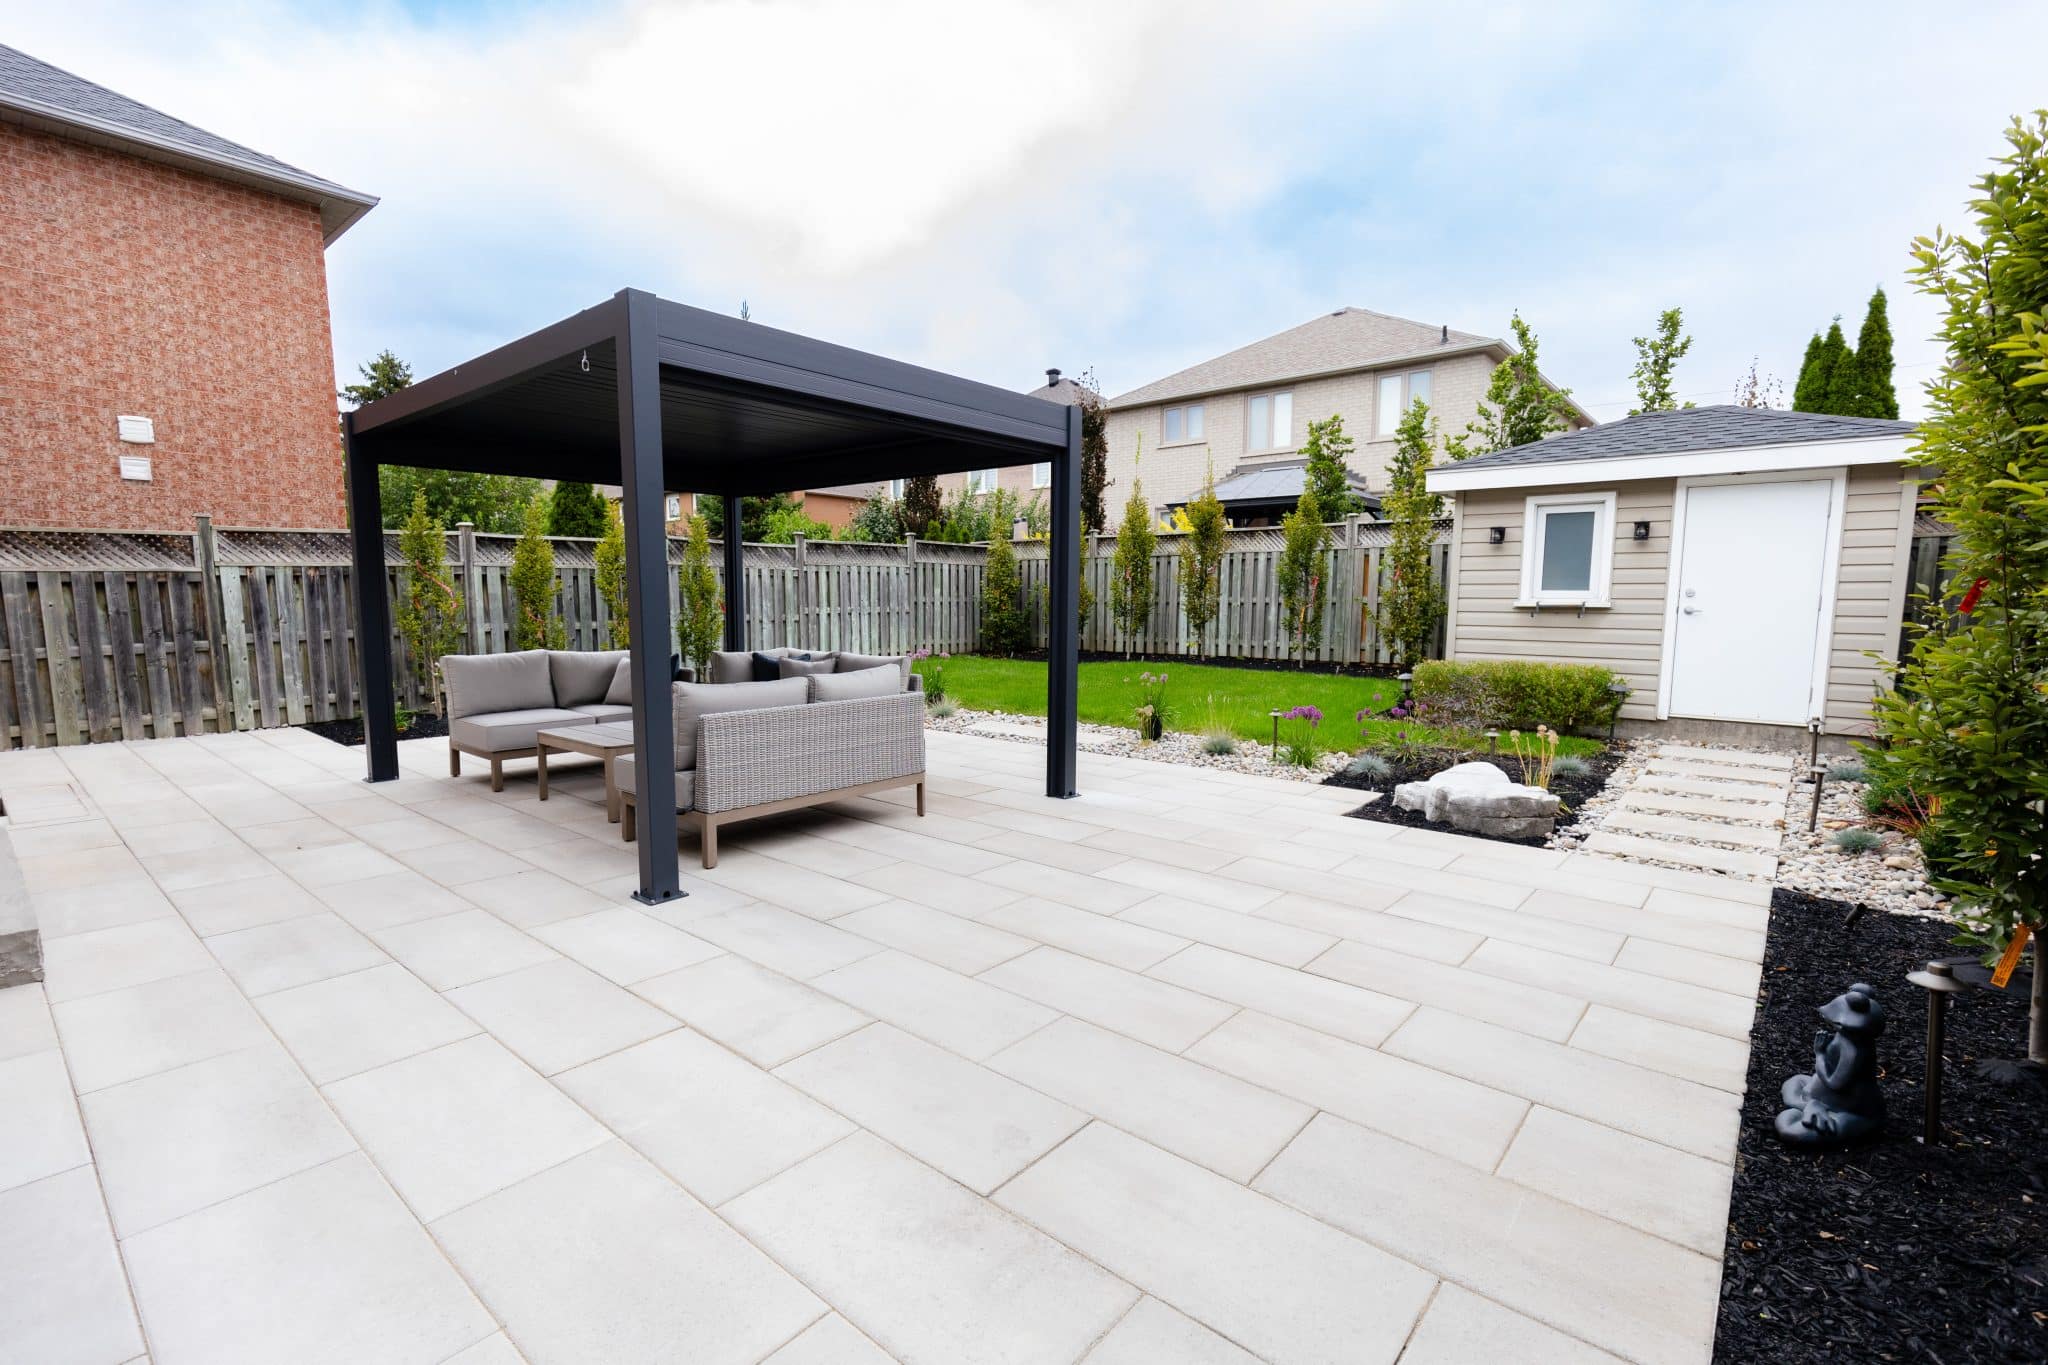 Professional Landscaping Services in Aurora by Avanti Landscaping